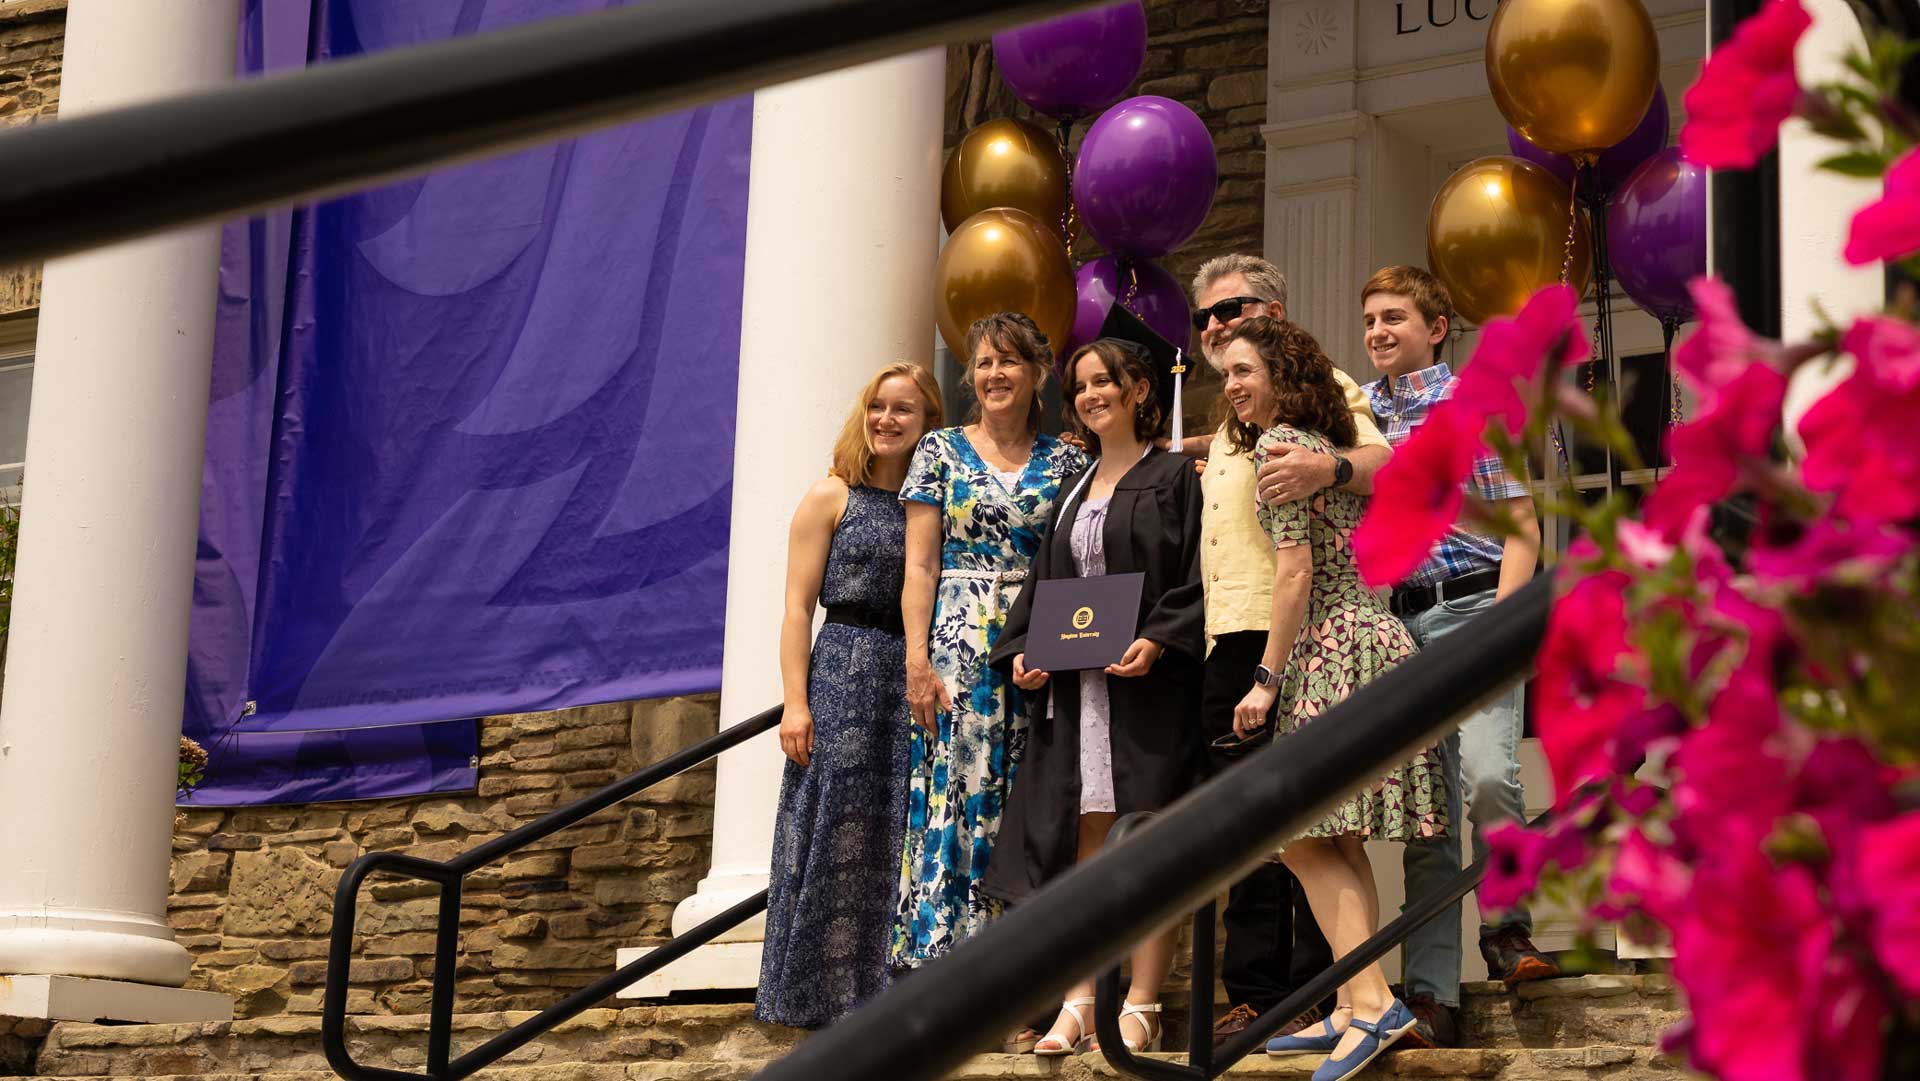 Houghton graduate and family take a photo on the steps of Luckey Memorial with balloons and flowers